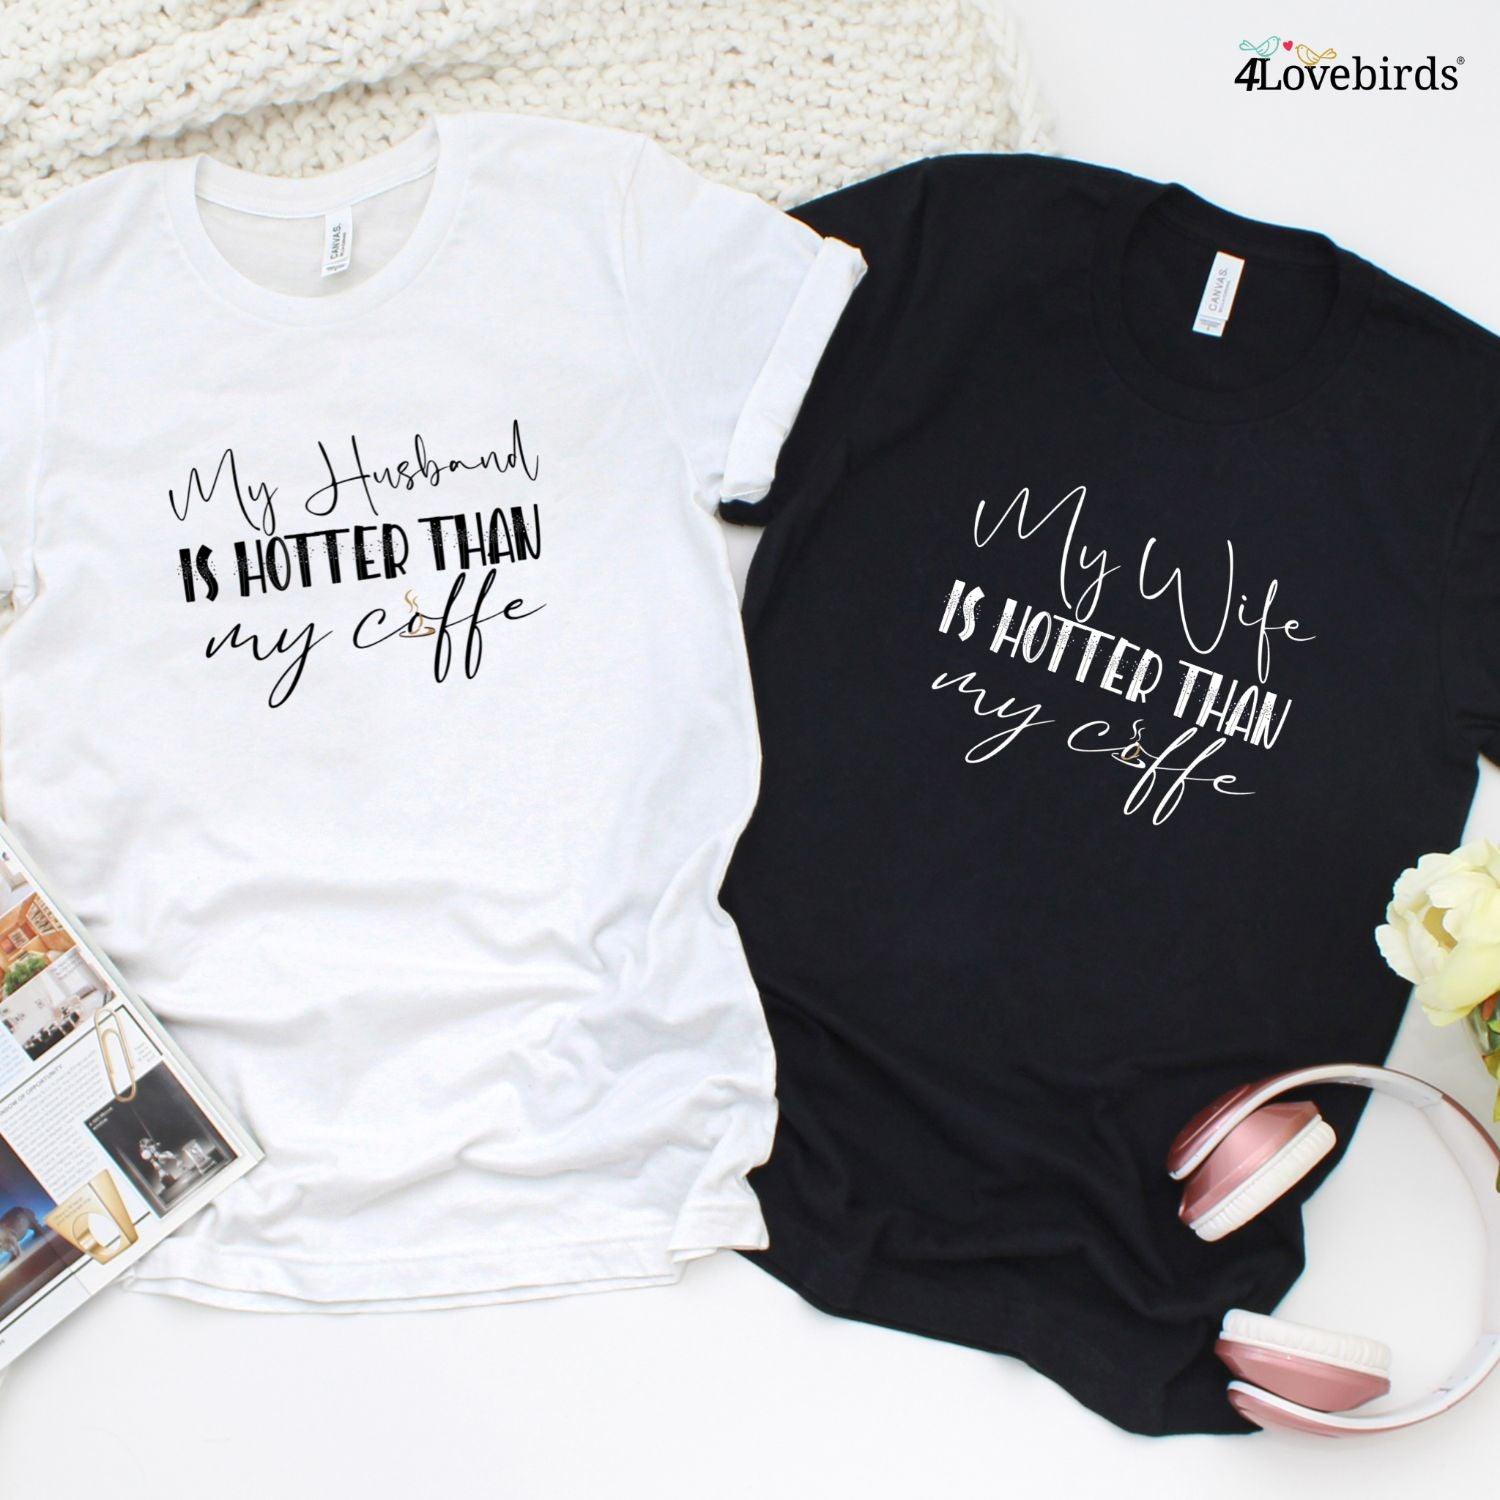 Matching Coffee Lovers Set: His&Hers Tops - Husband Hotter Than Coffee Gifts - 4Lovebirds